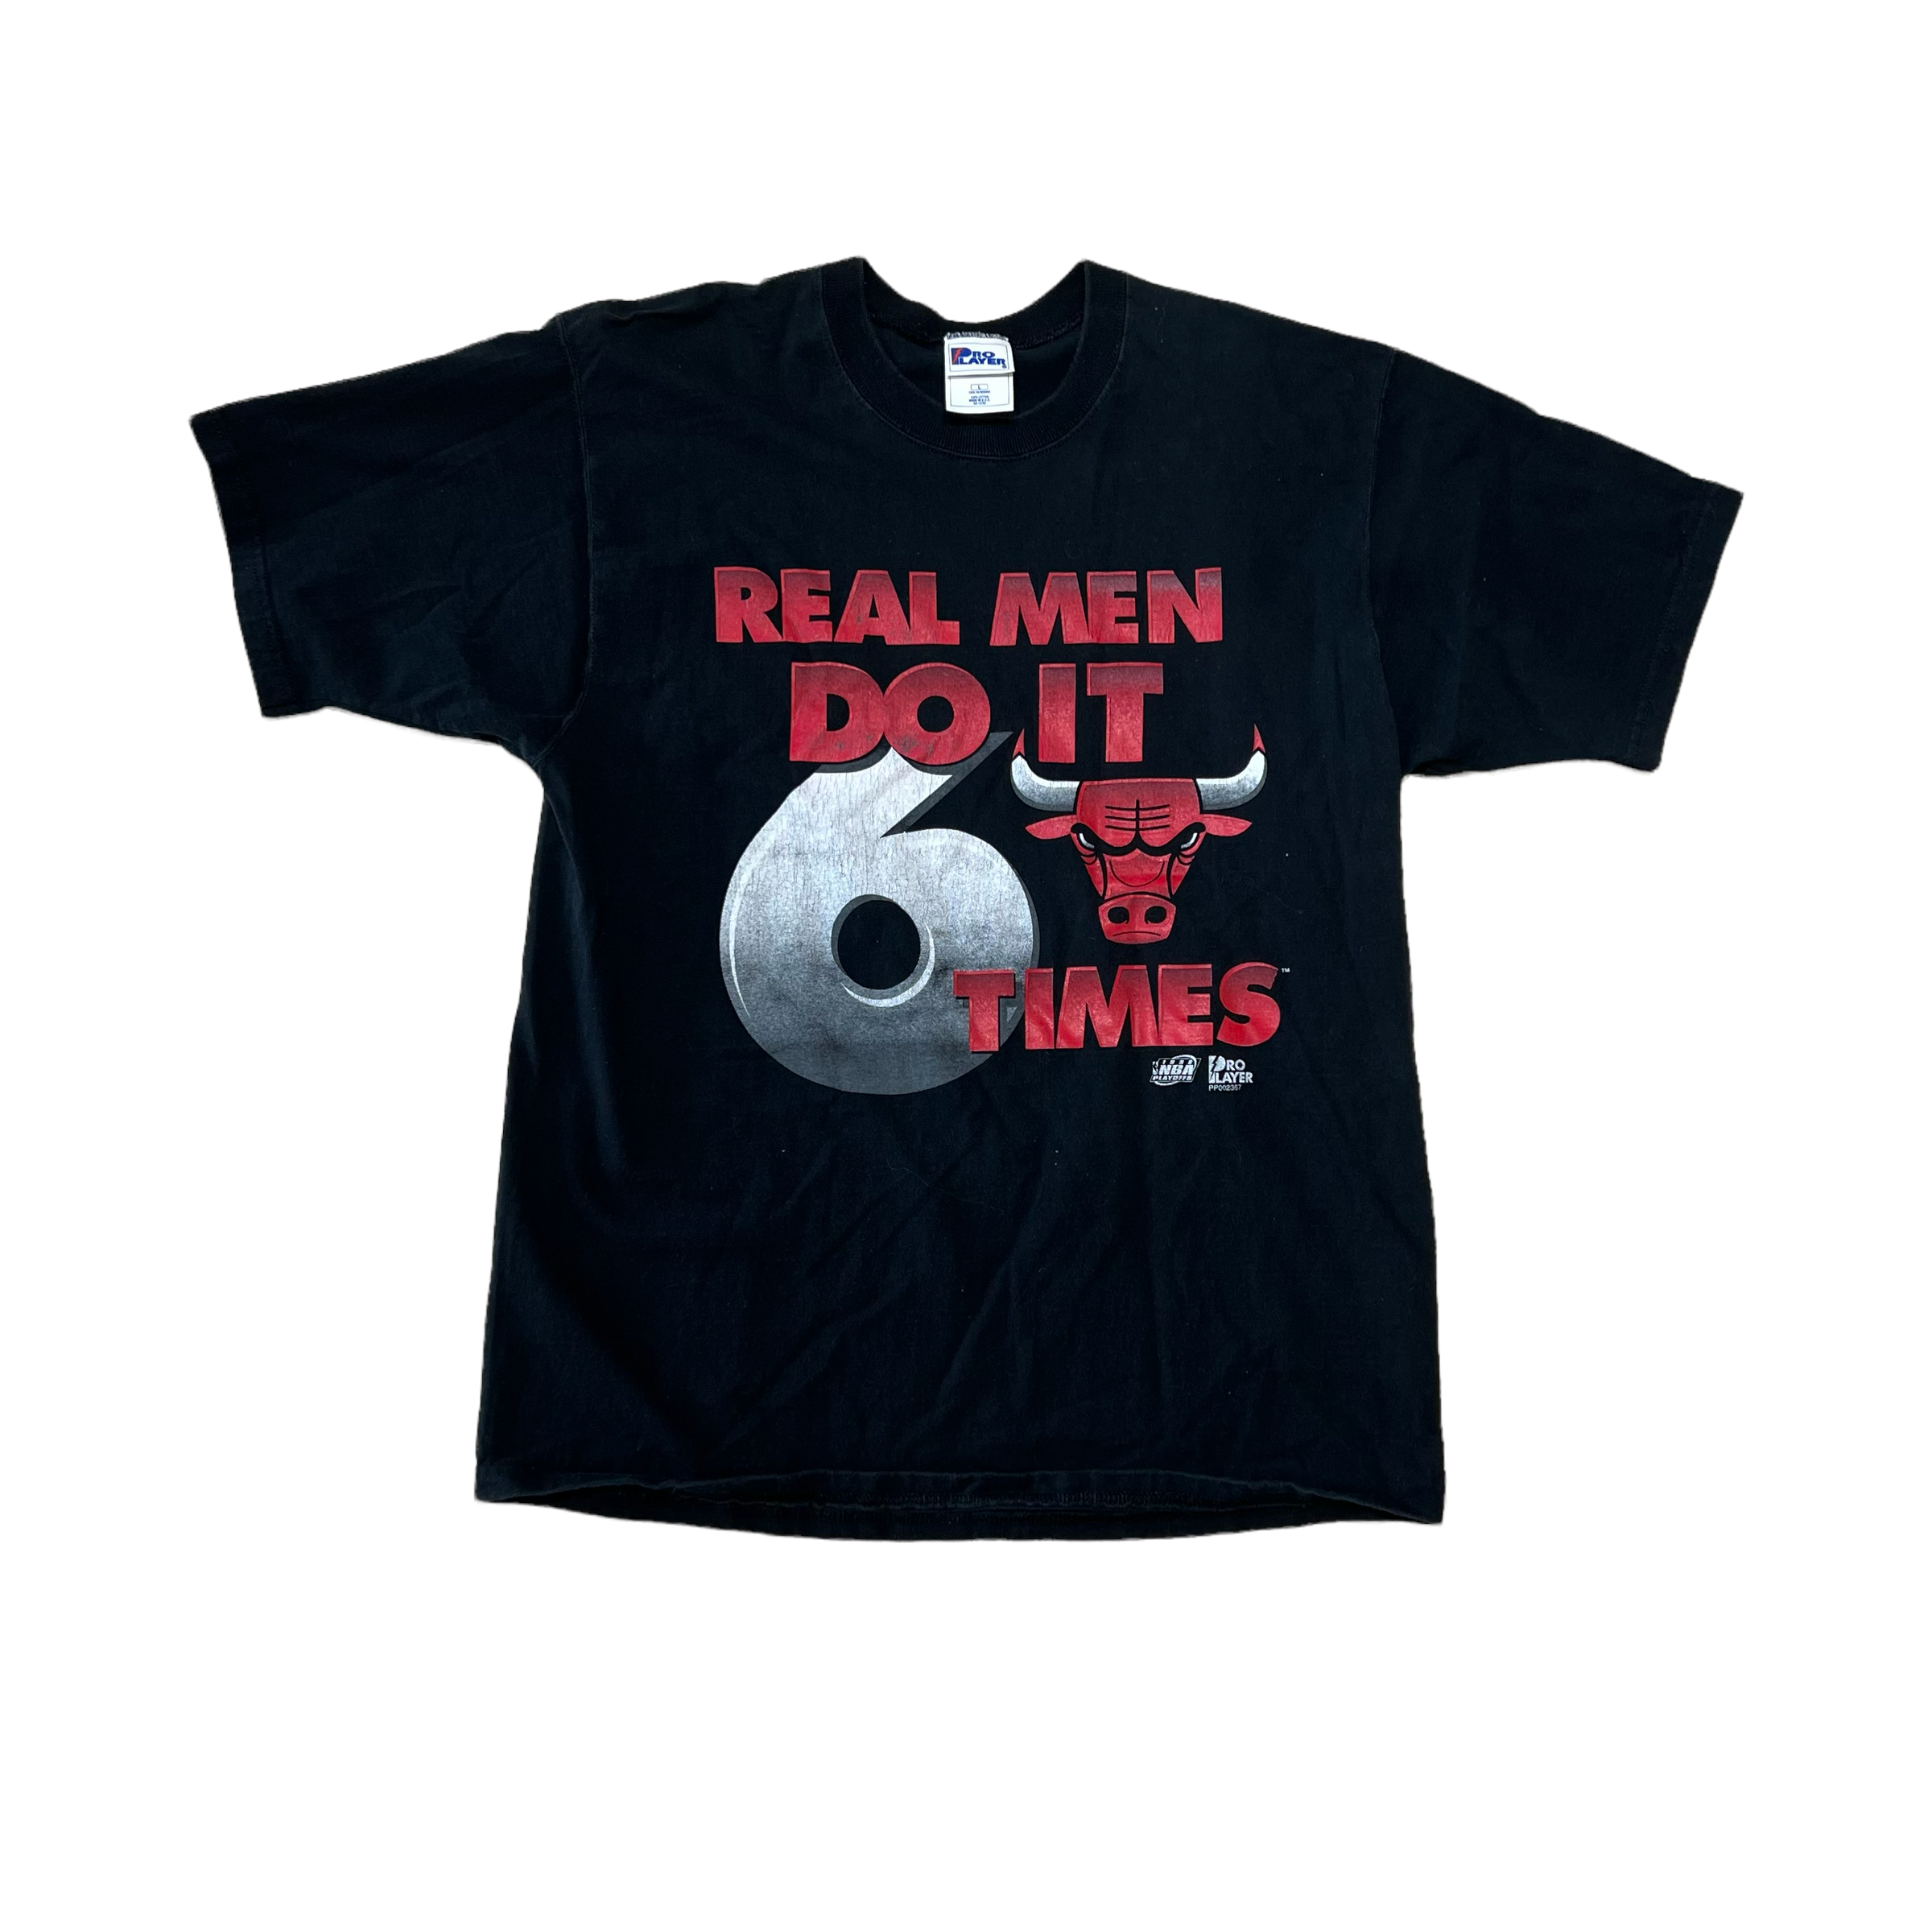 1998 CHICAGO BULLS REAL MEN DO IT 6 TIMES TEE